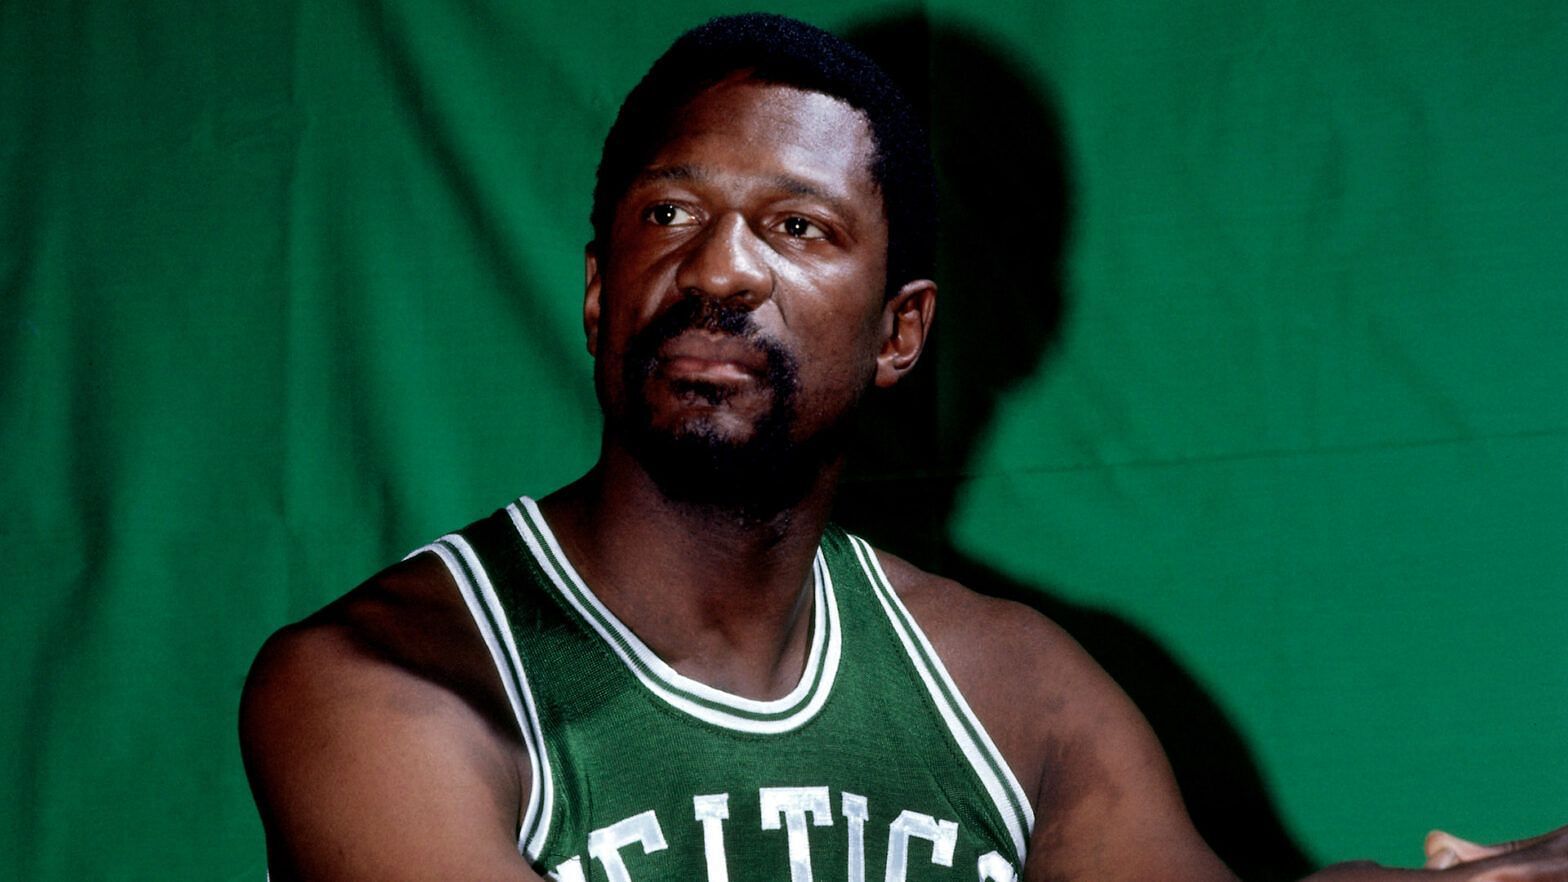 Bill Russell has dominated the NBA news recently with his passing